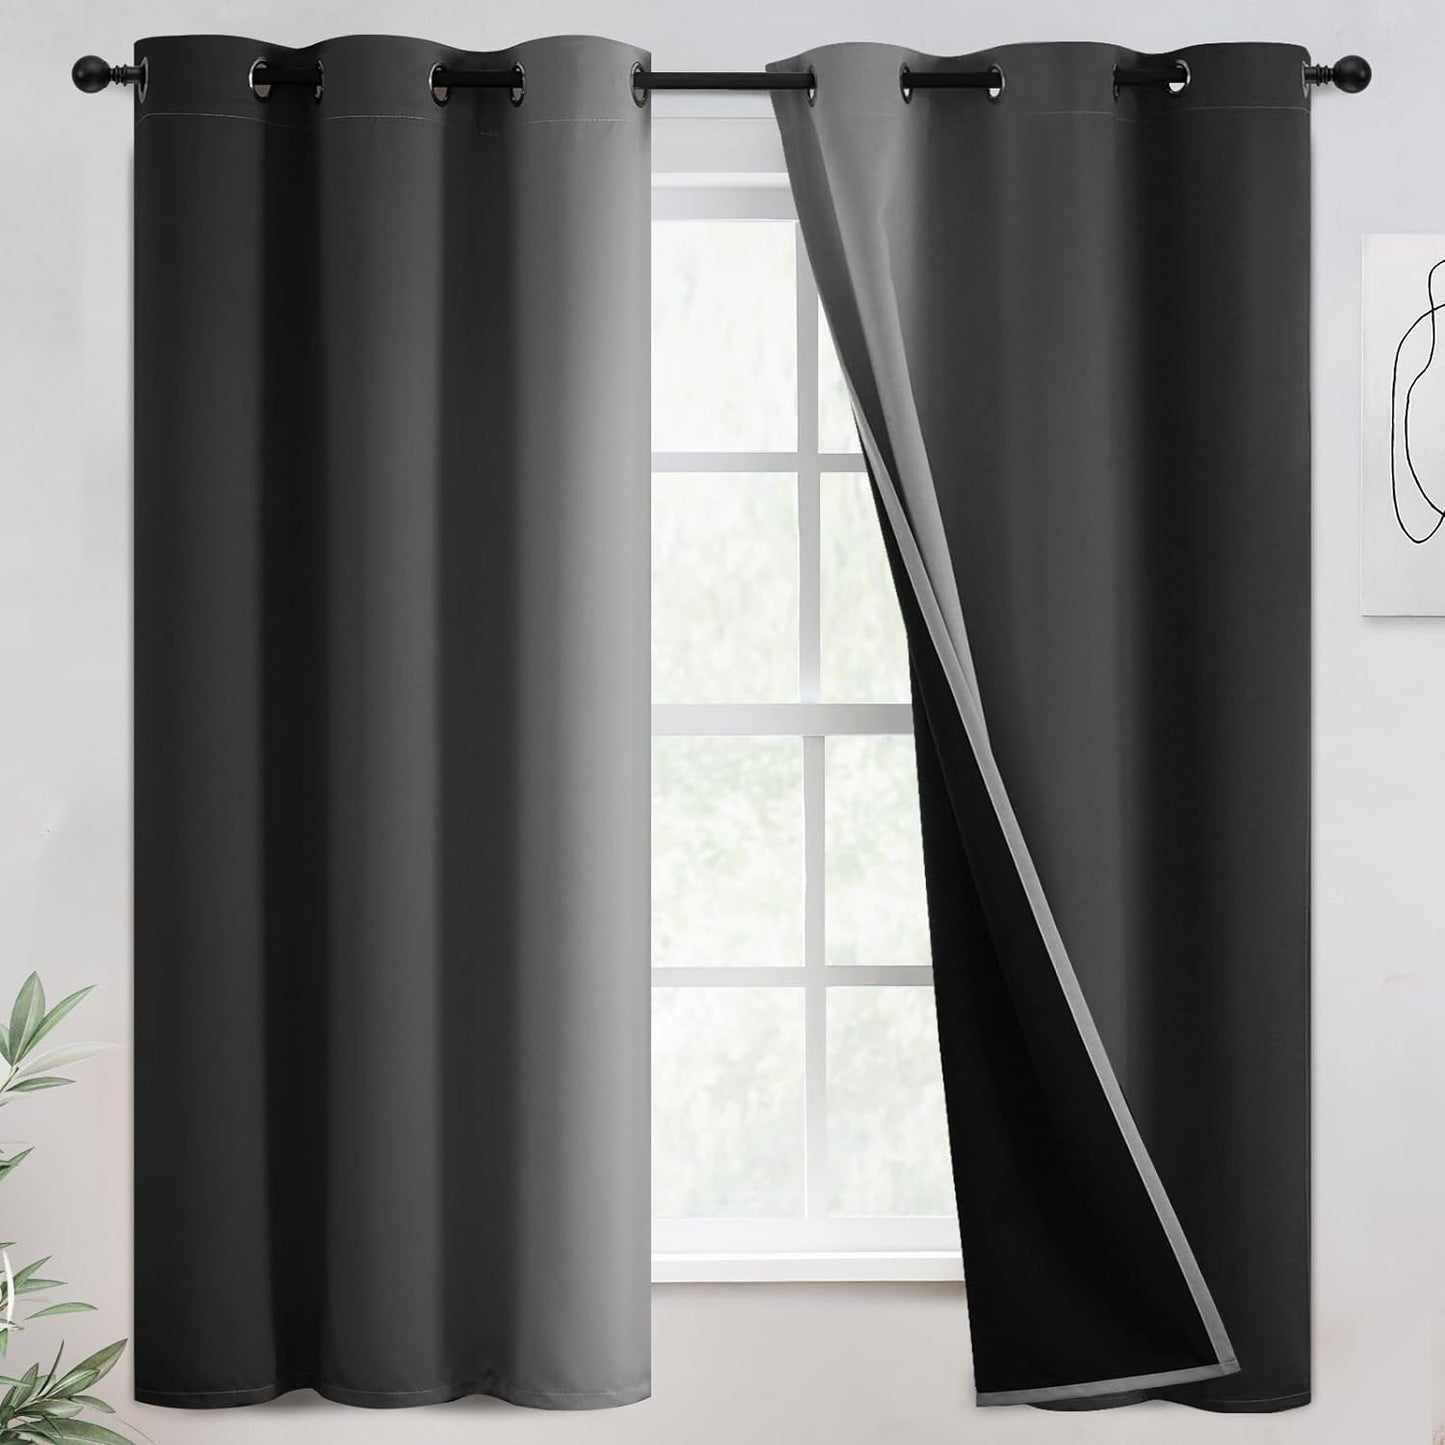 COSVIYA 100% Blackout Curtains & Drapes Ombre Purple Curtains 63 Inch Length 2 Panels,Full Room Darkening Grommet Gradient Insulated Thermal Window Curtains for Bedroom/Living Room,52X63 Inches  COSVIYA Black To Greyish White 42W X 63L 